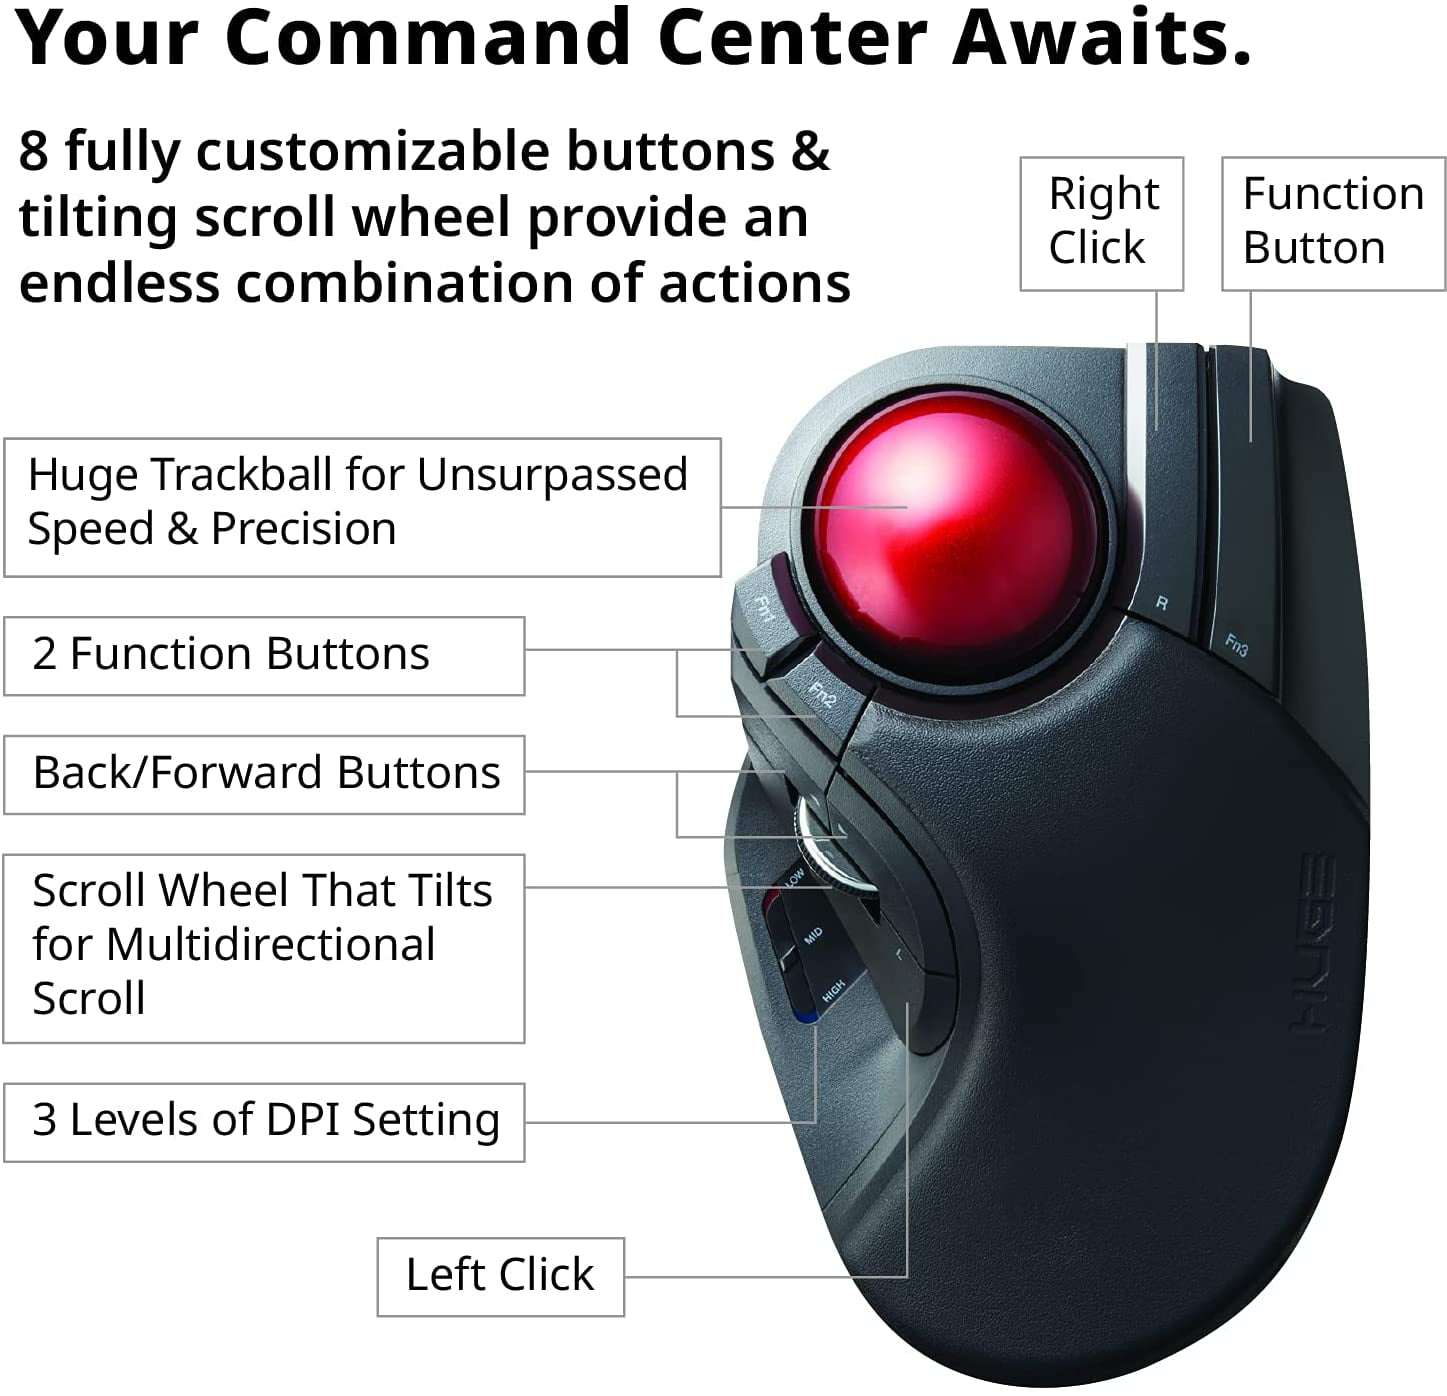 2.4GHz Wireless Finger-operated Large size Trackball Mouse 8-Button Function  with Smooth Tracking, Precision Optical Gaming Sensor Palm Rest Attached (M- HT1DRBK) 